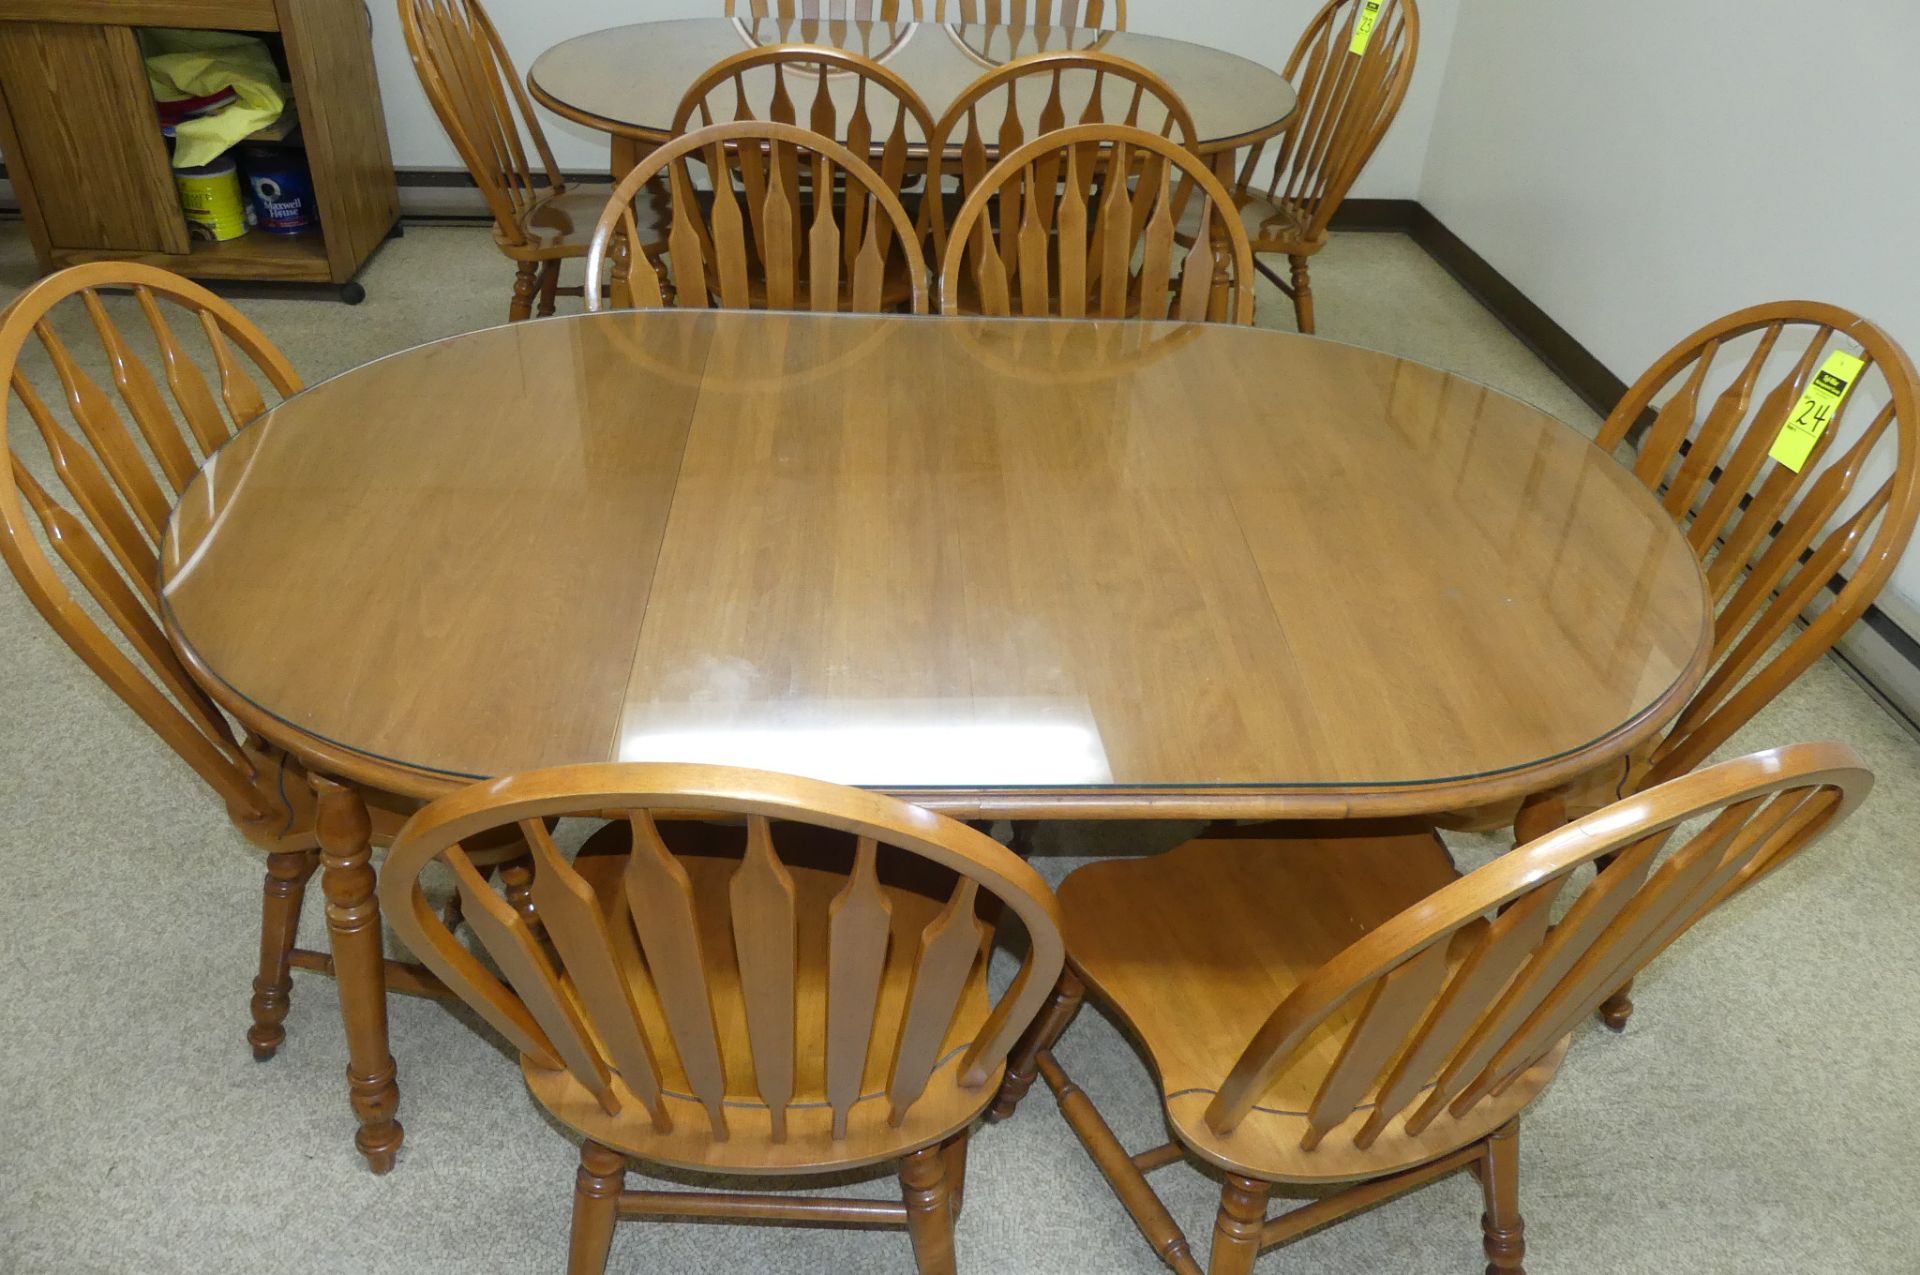 ROXTON TABLE & 6-CHAIRS